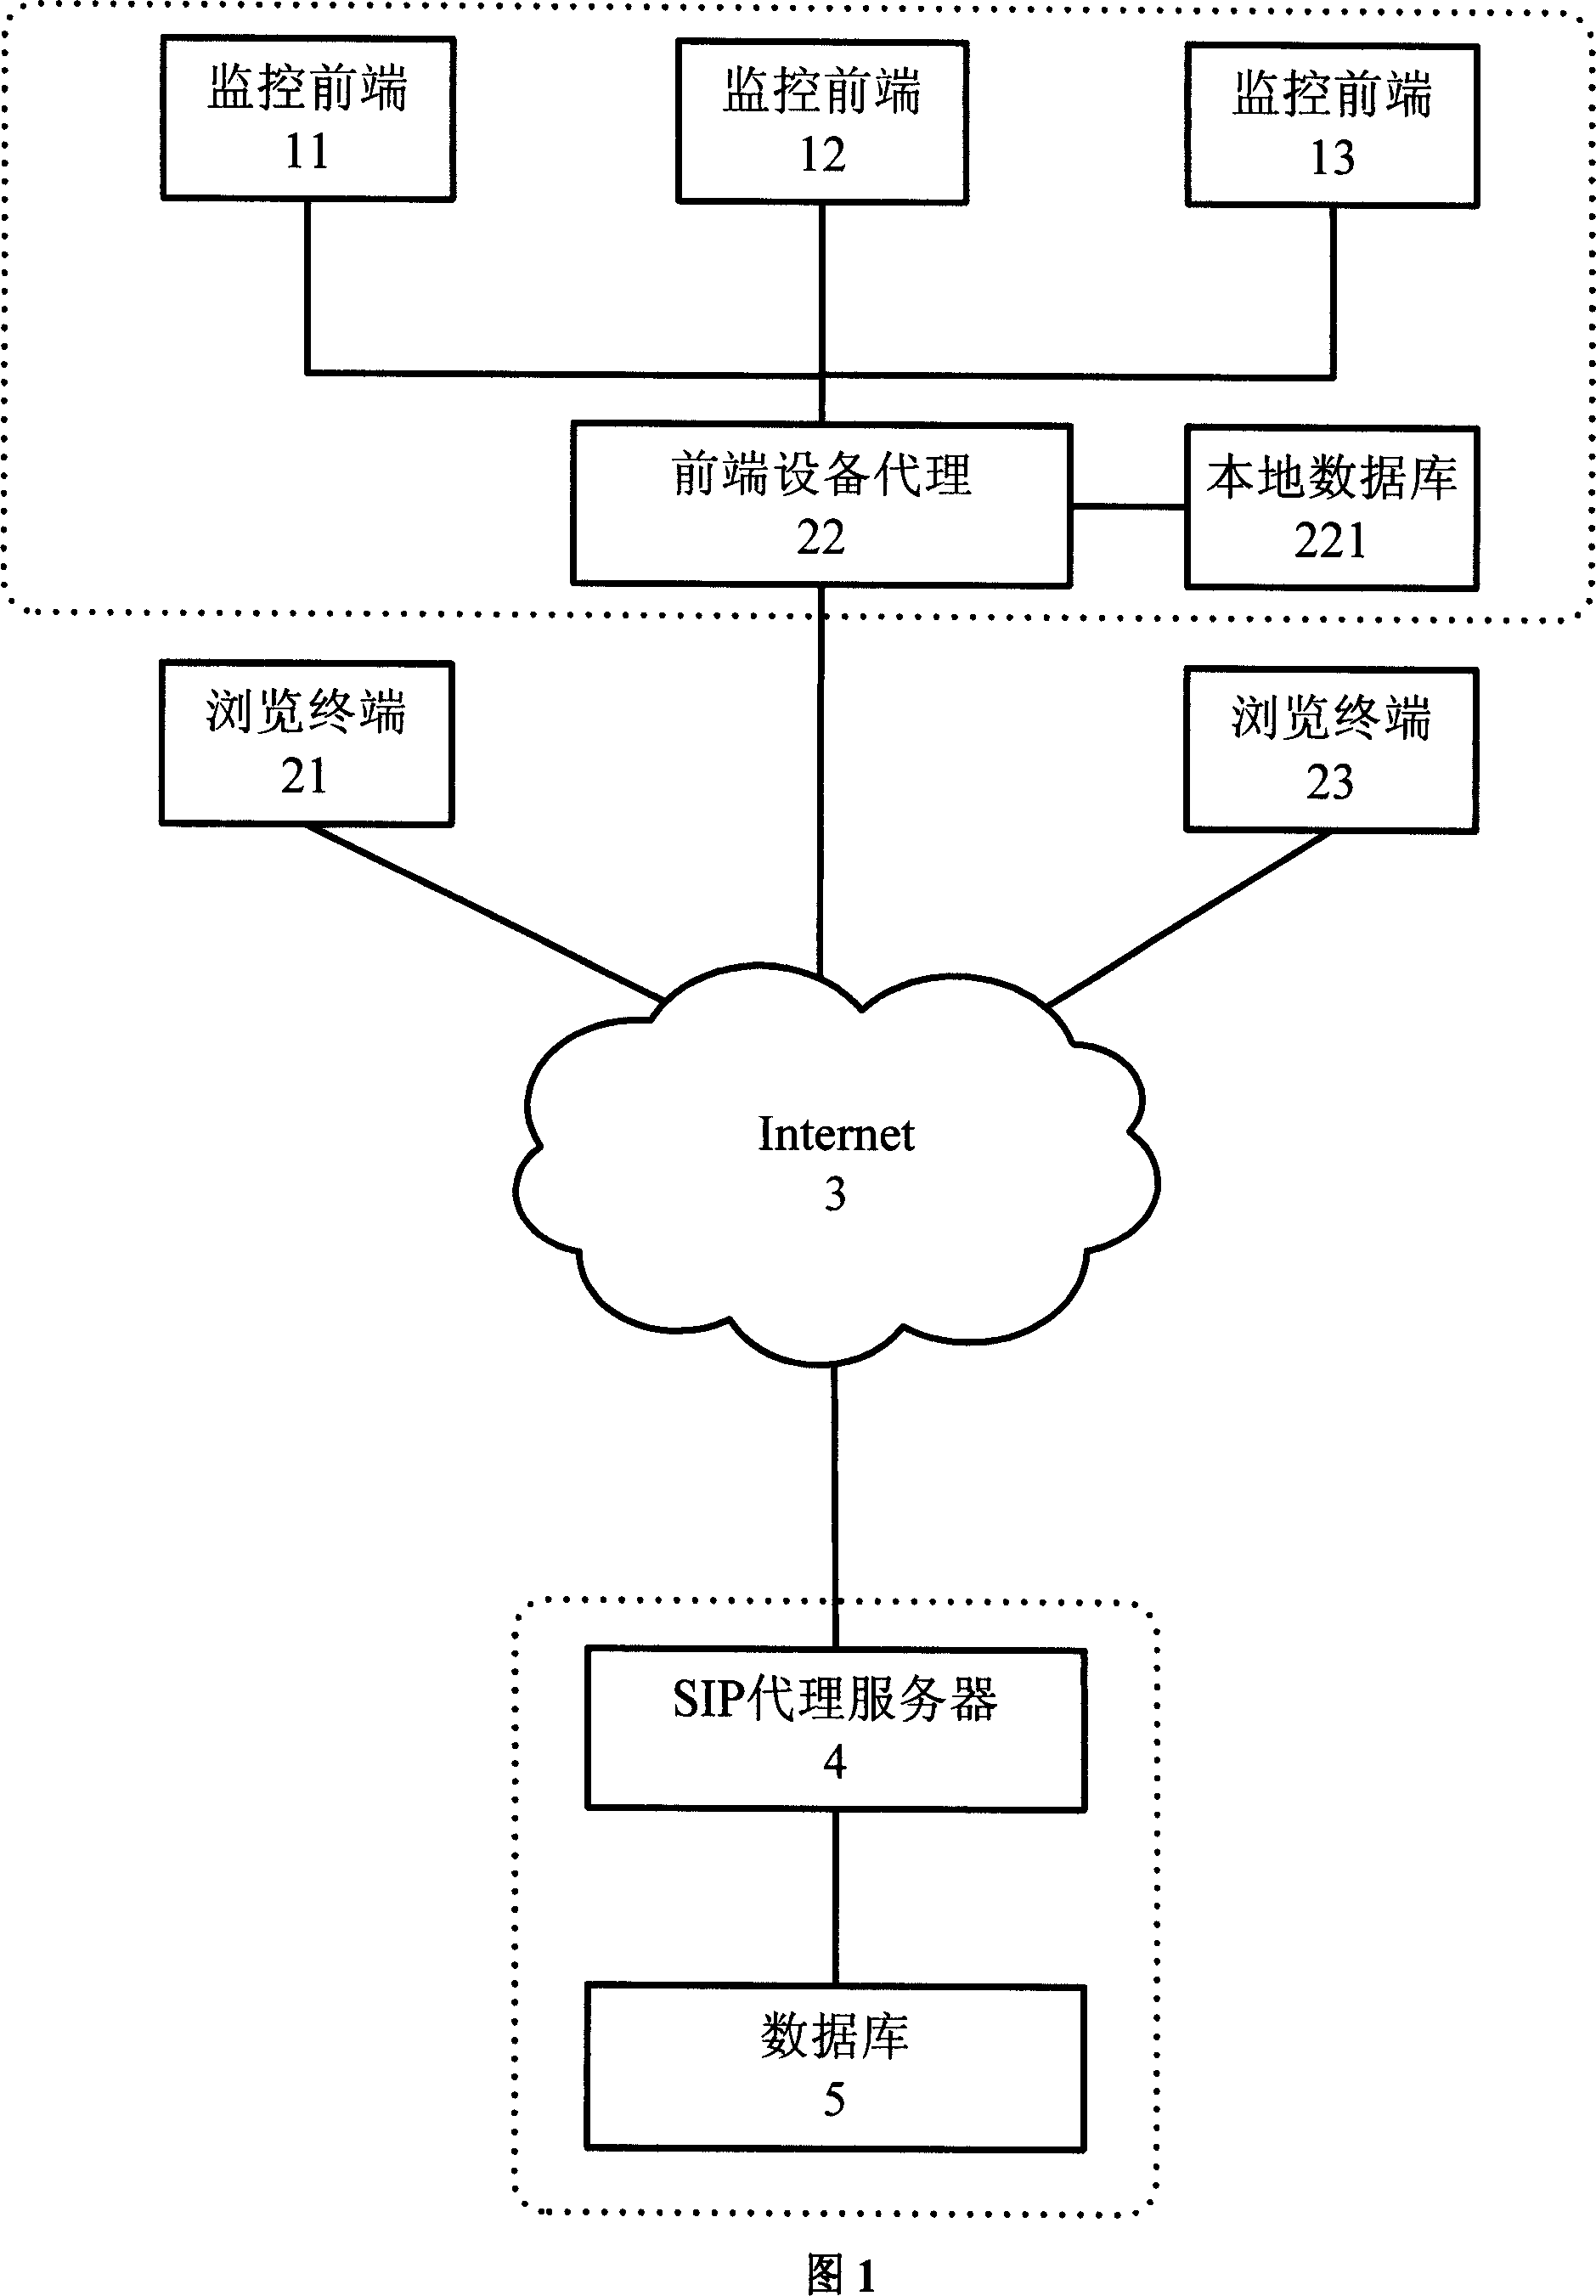 Method for realizing OPTIONS self-query for video business based on SIP protocol